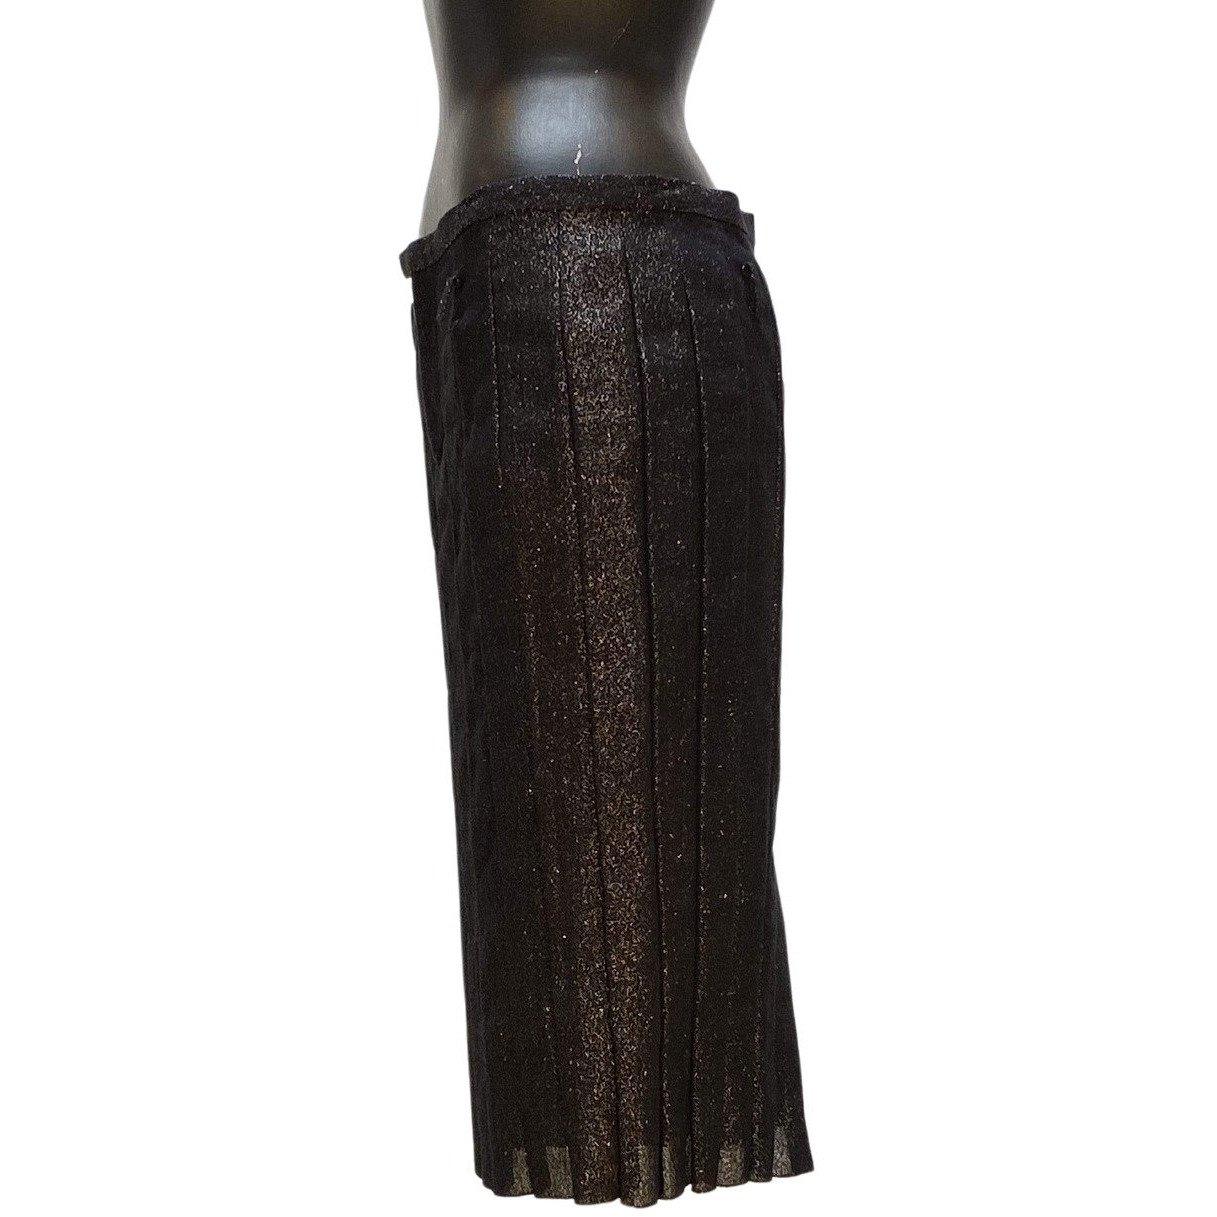 Stunning pencil skirt comes from vintage Undercover. The gentle pleats of this knee length pencil skirt are unique, but the shimmering metallic black blend of linen and cotton is what truly sets it apart. It has a zip front and a single back pocket.